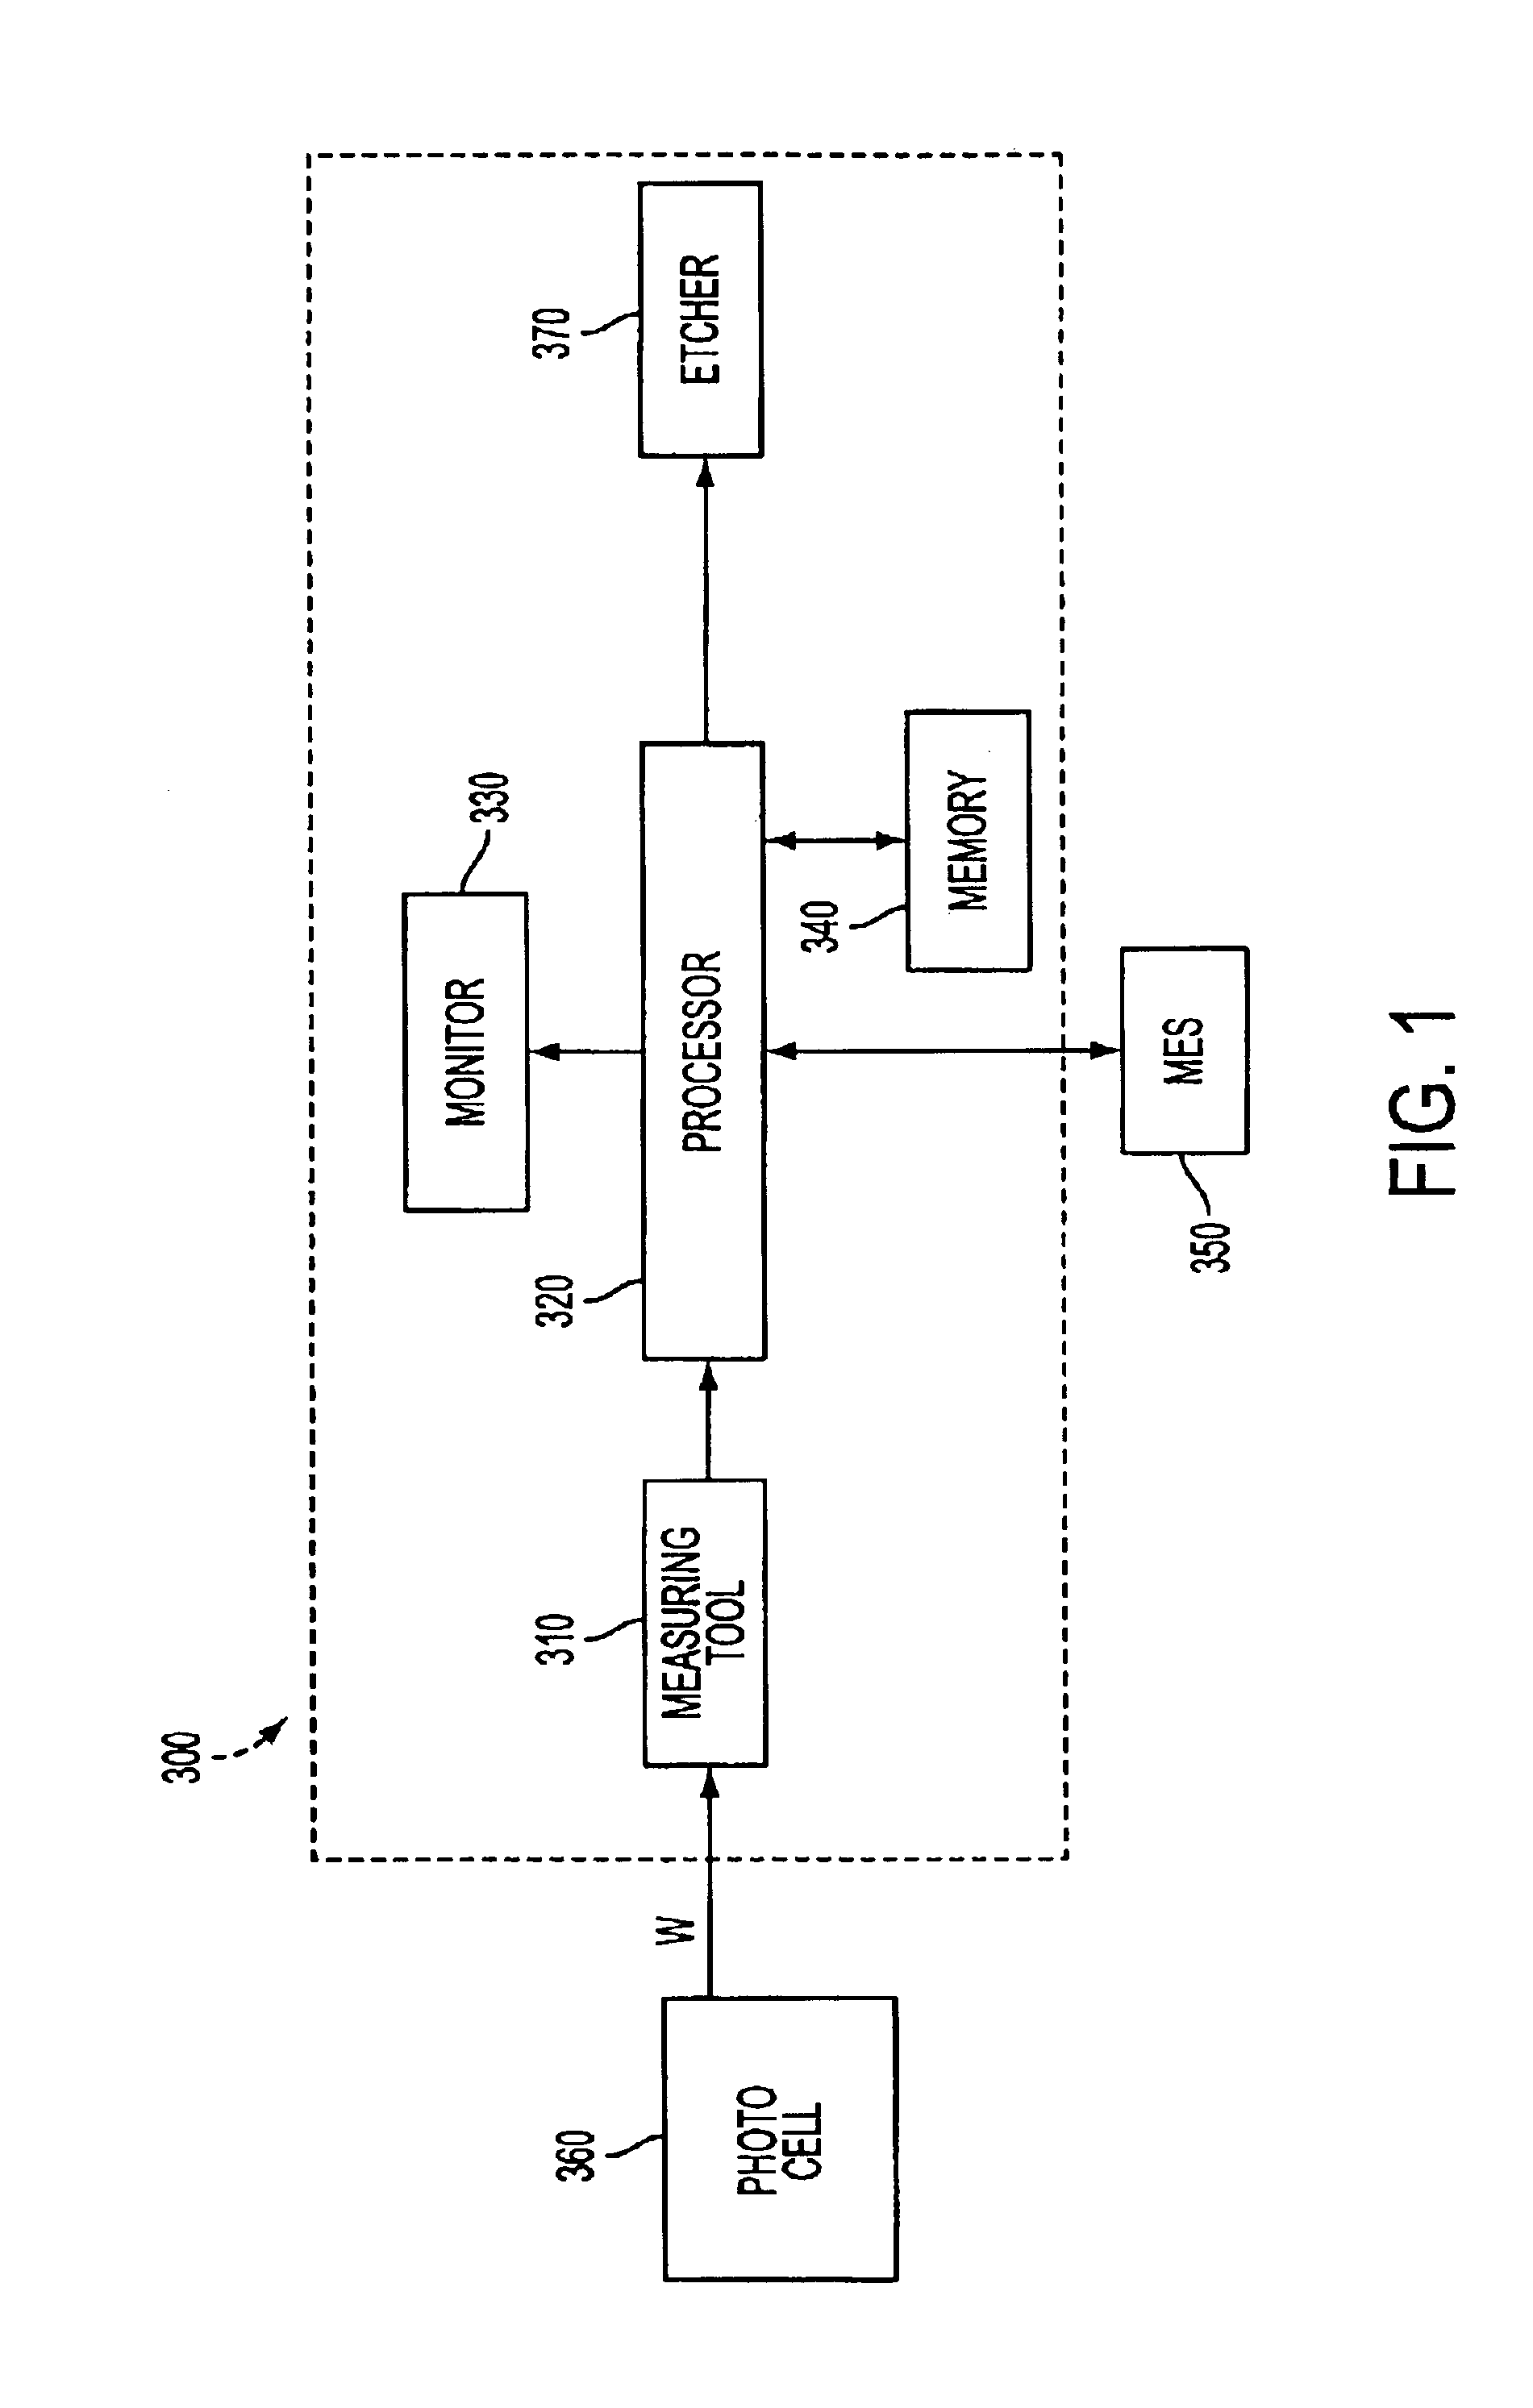 Method and system for realtime CD microloading control